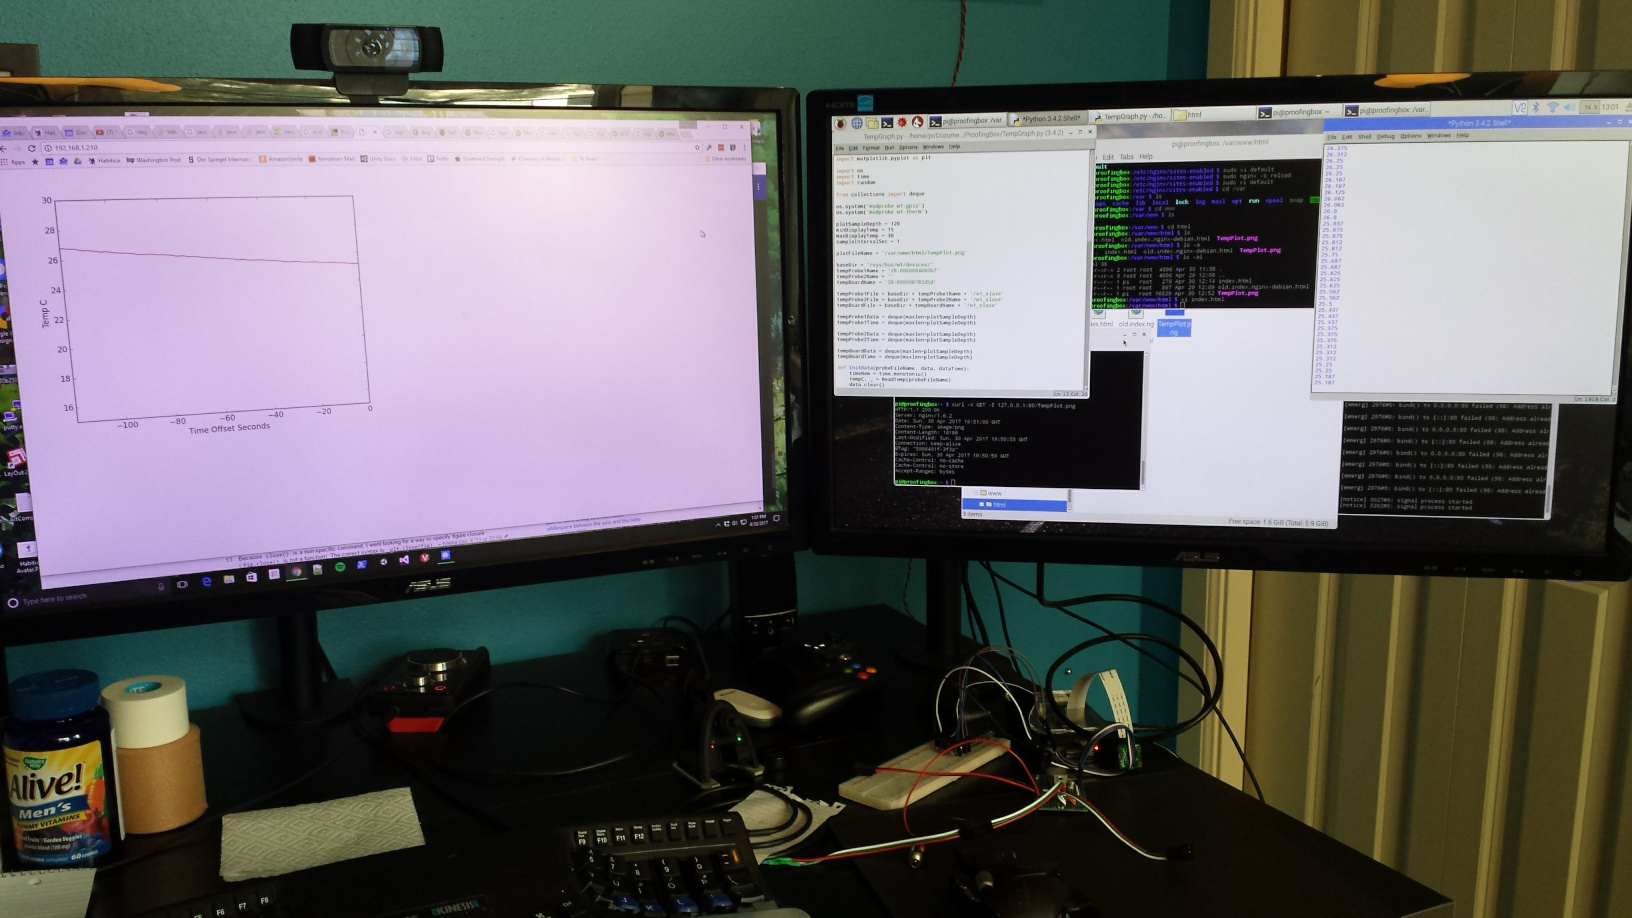 A pair of monitors showing graphs and terminal windows, with electronics sitting below the monitors.